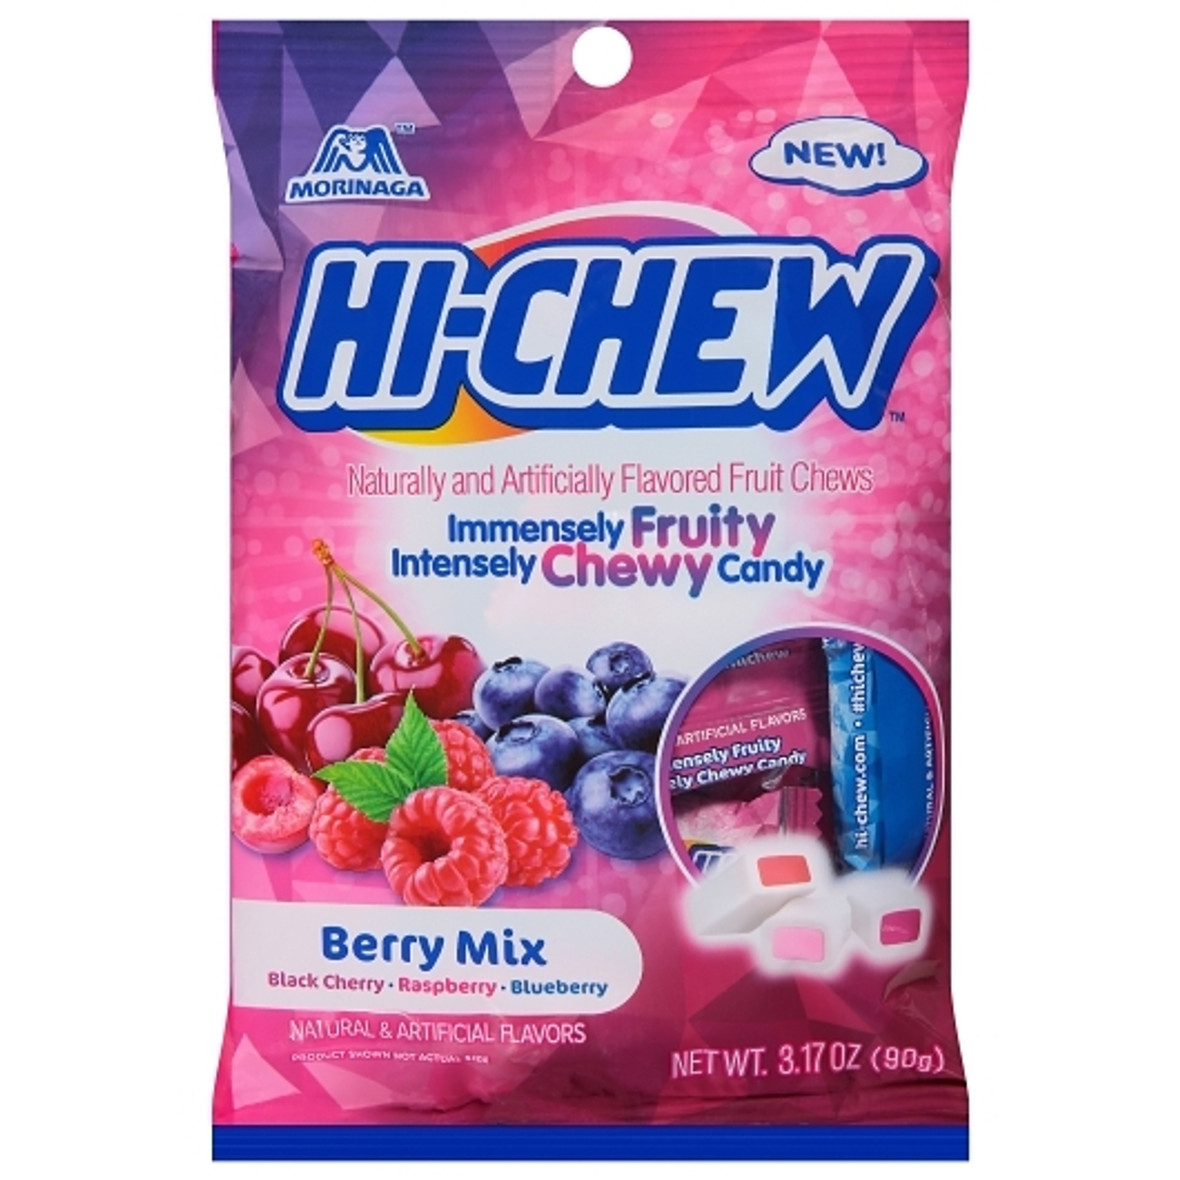 Hi Chew Berry Mix Chewy Candy - Display, 3.17 Ounce, 6 Per Case